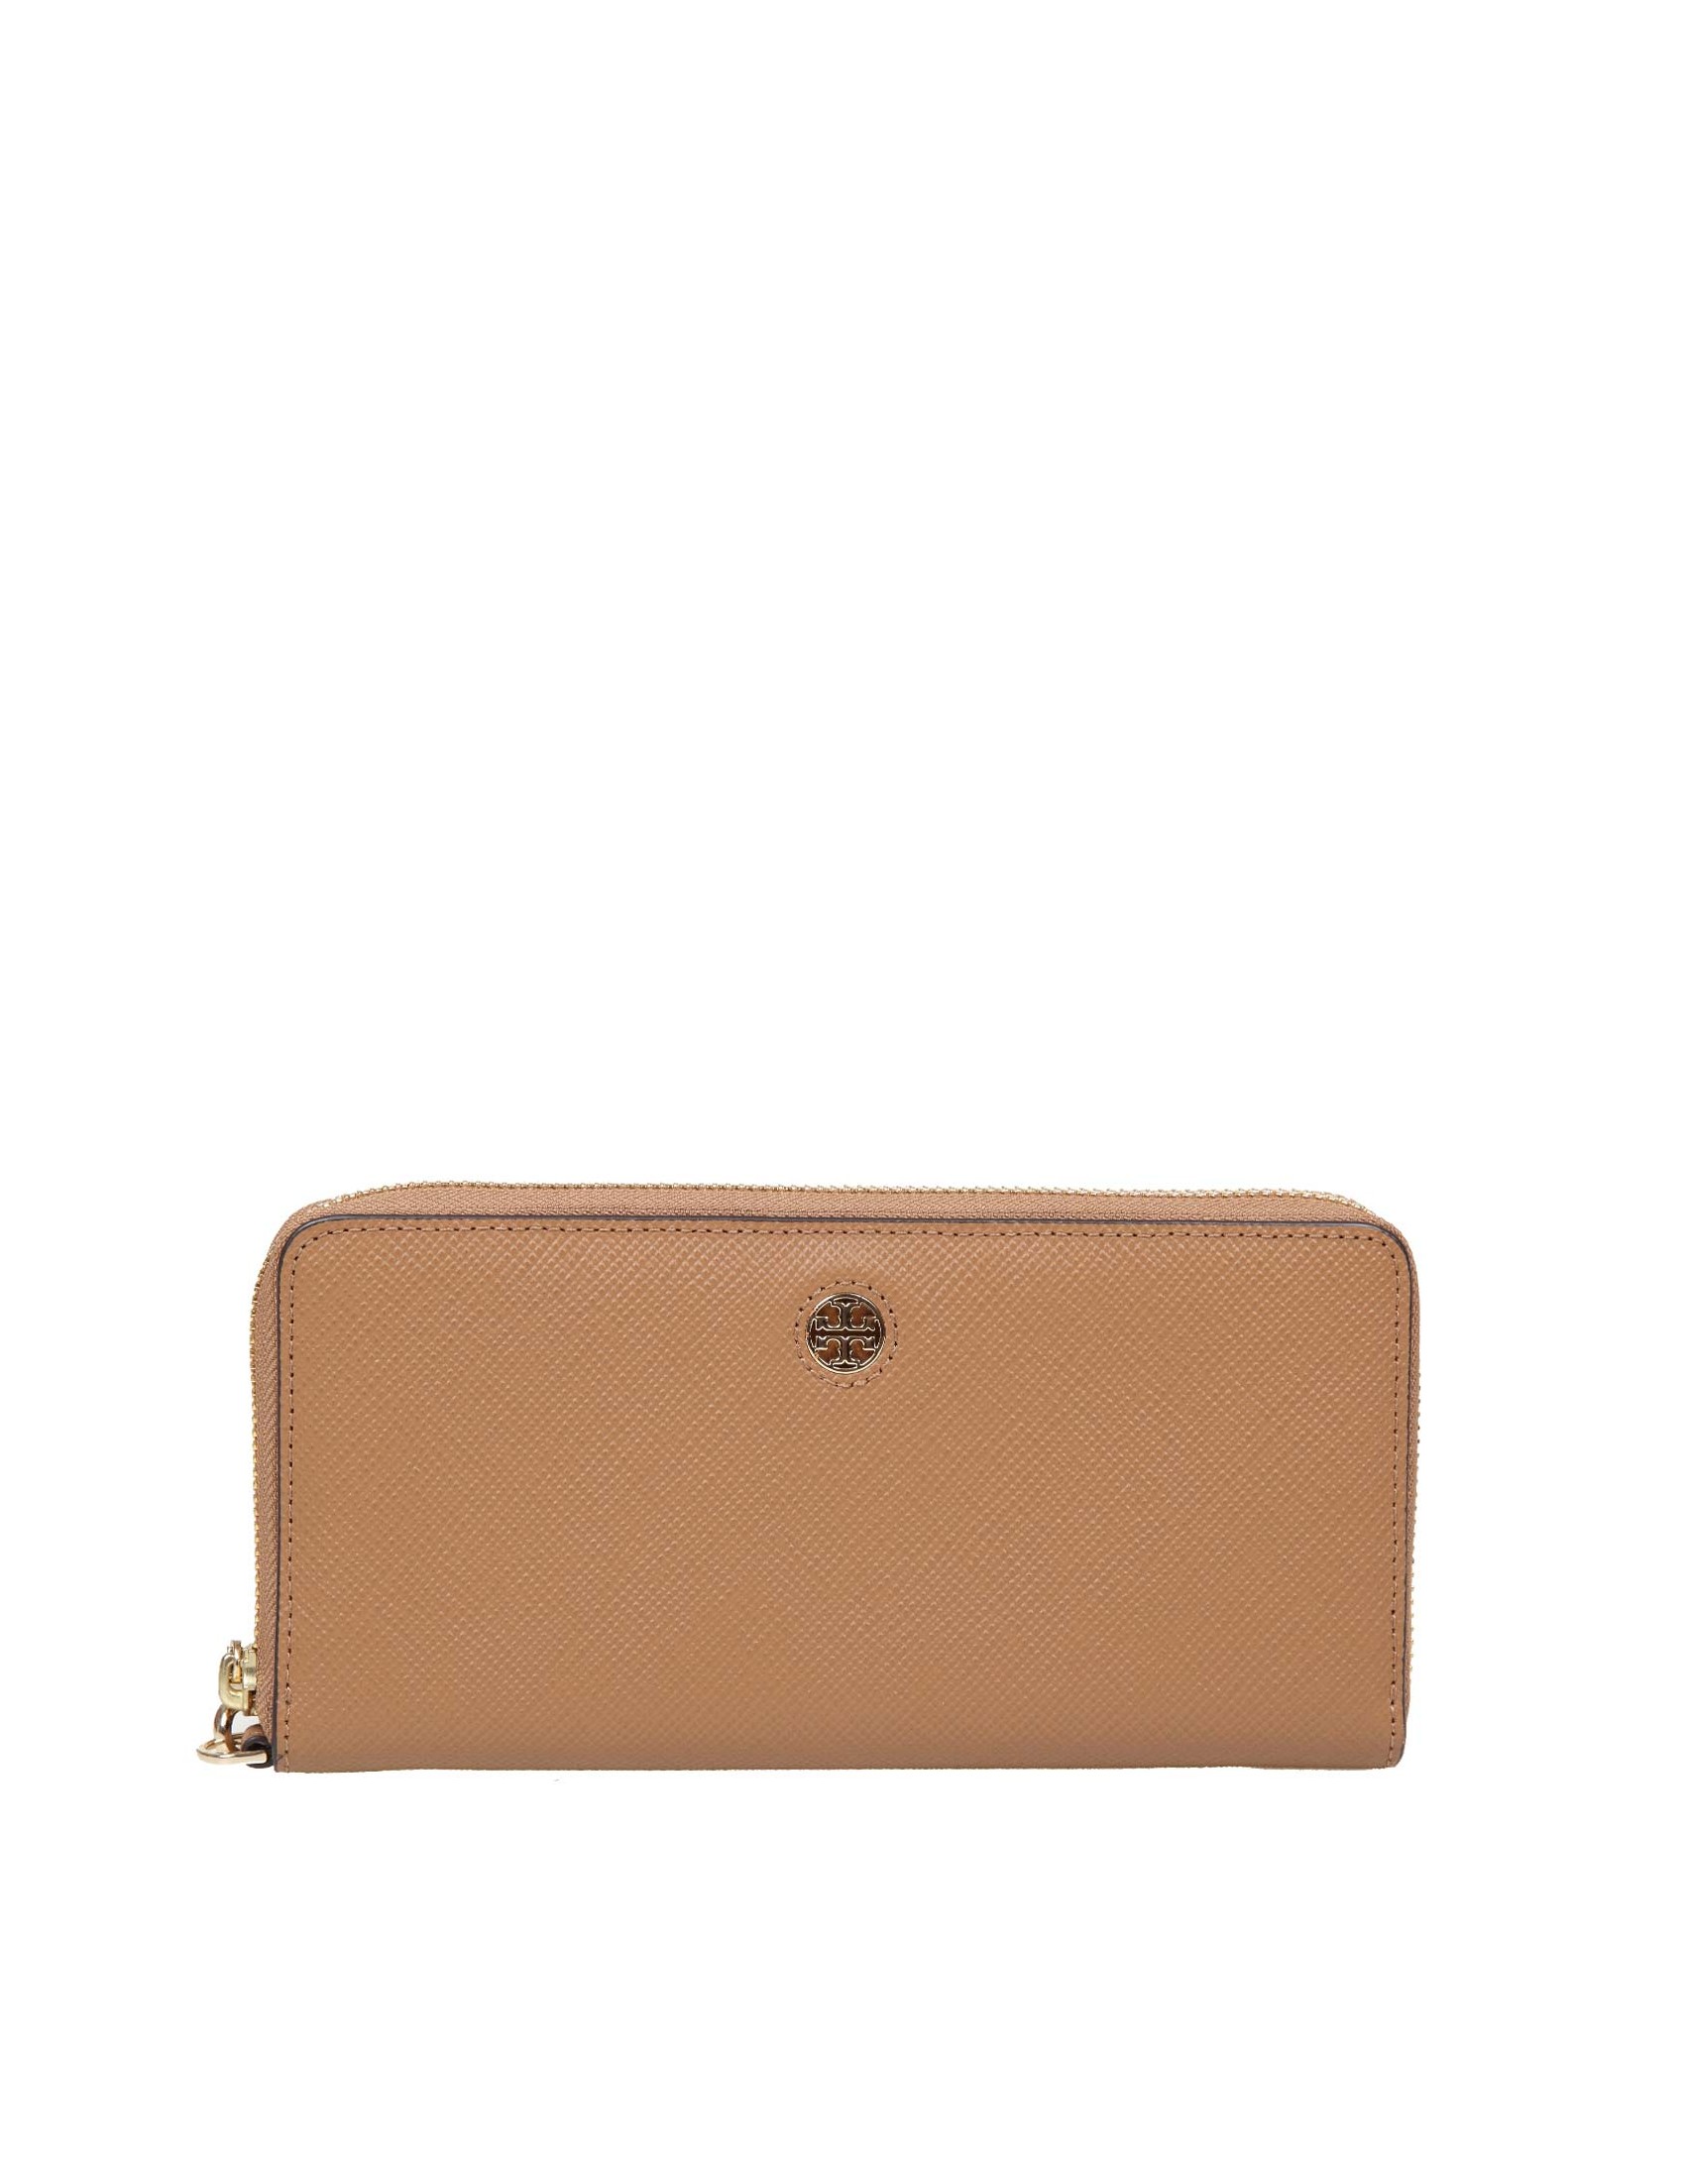 TORY BURCH PERRY ZIP WALLET IN LEATHER COLOR LEATHER